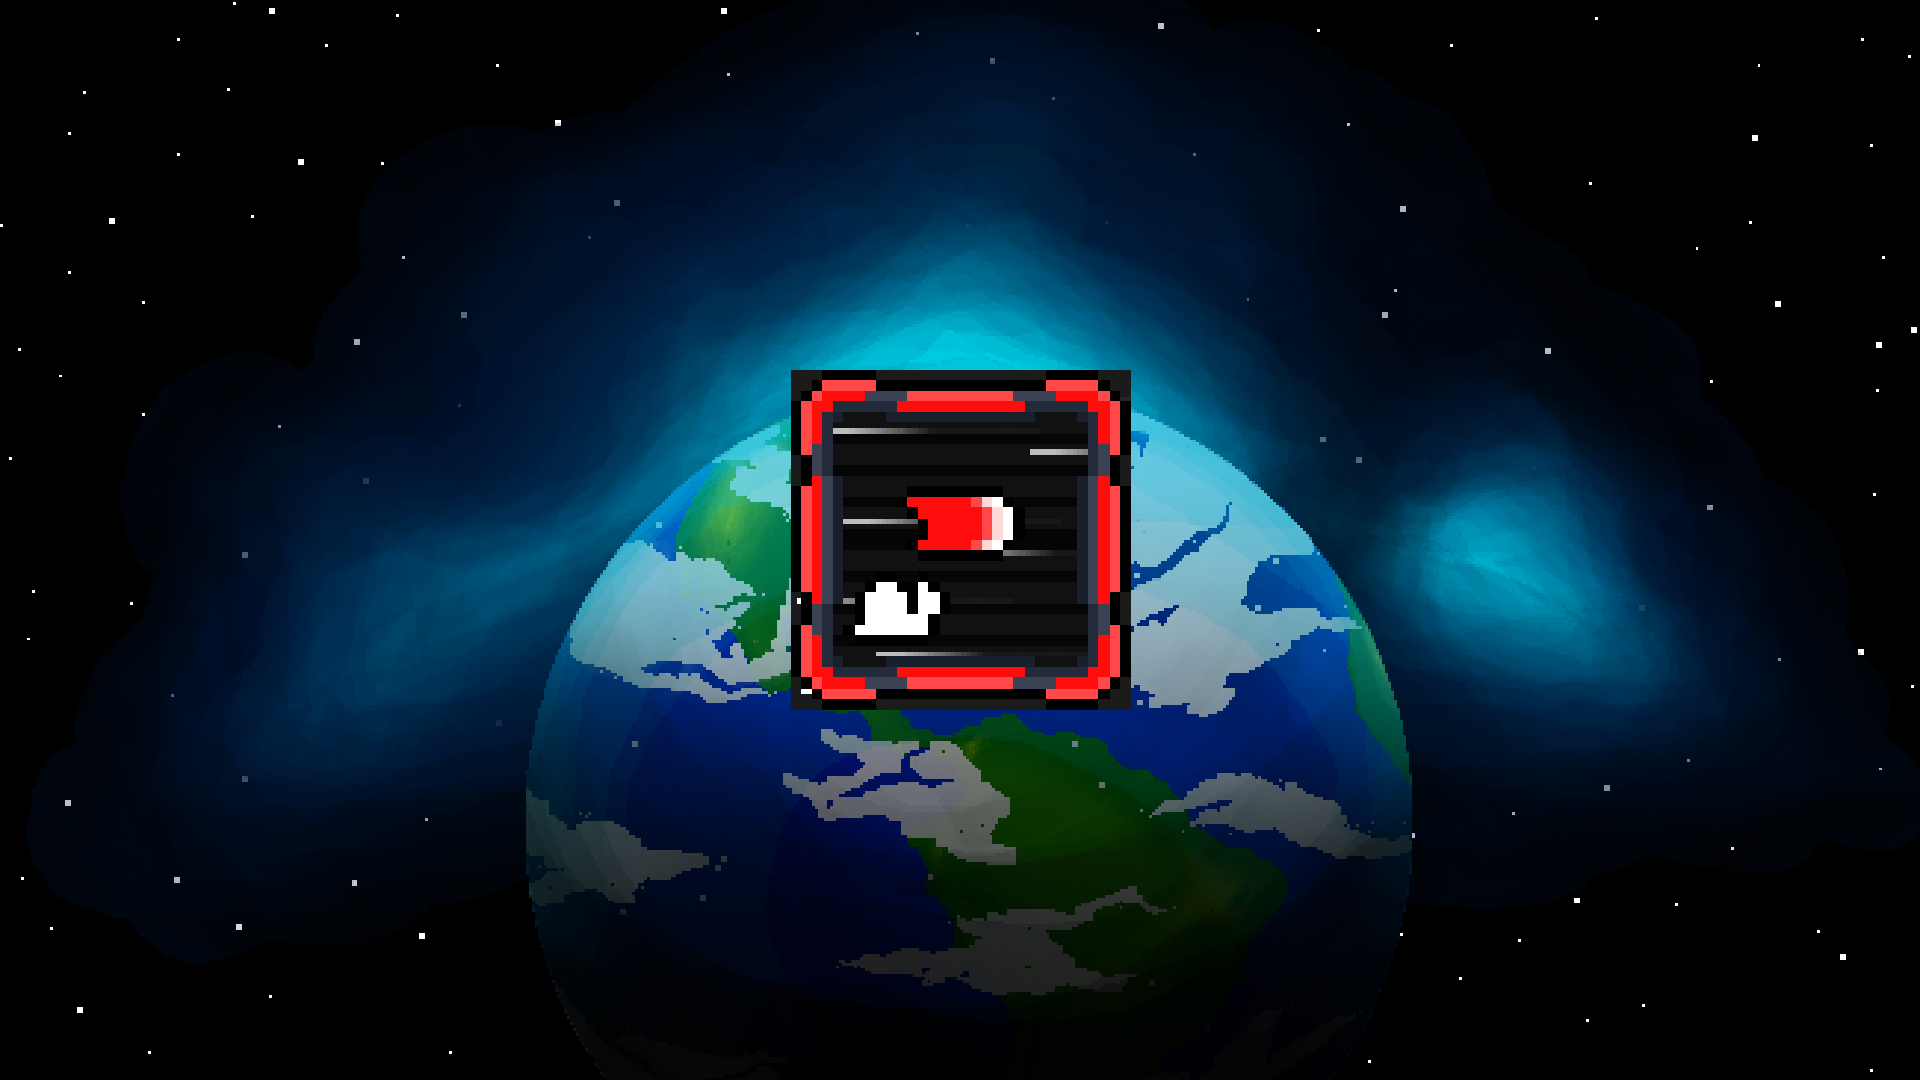 Icon for Enemy bullet slow